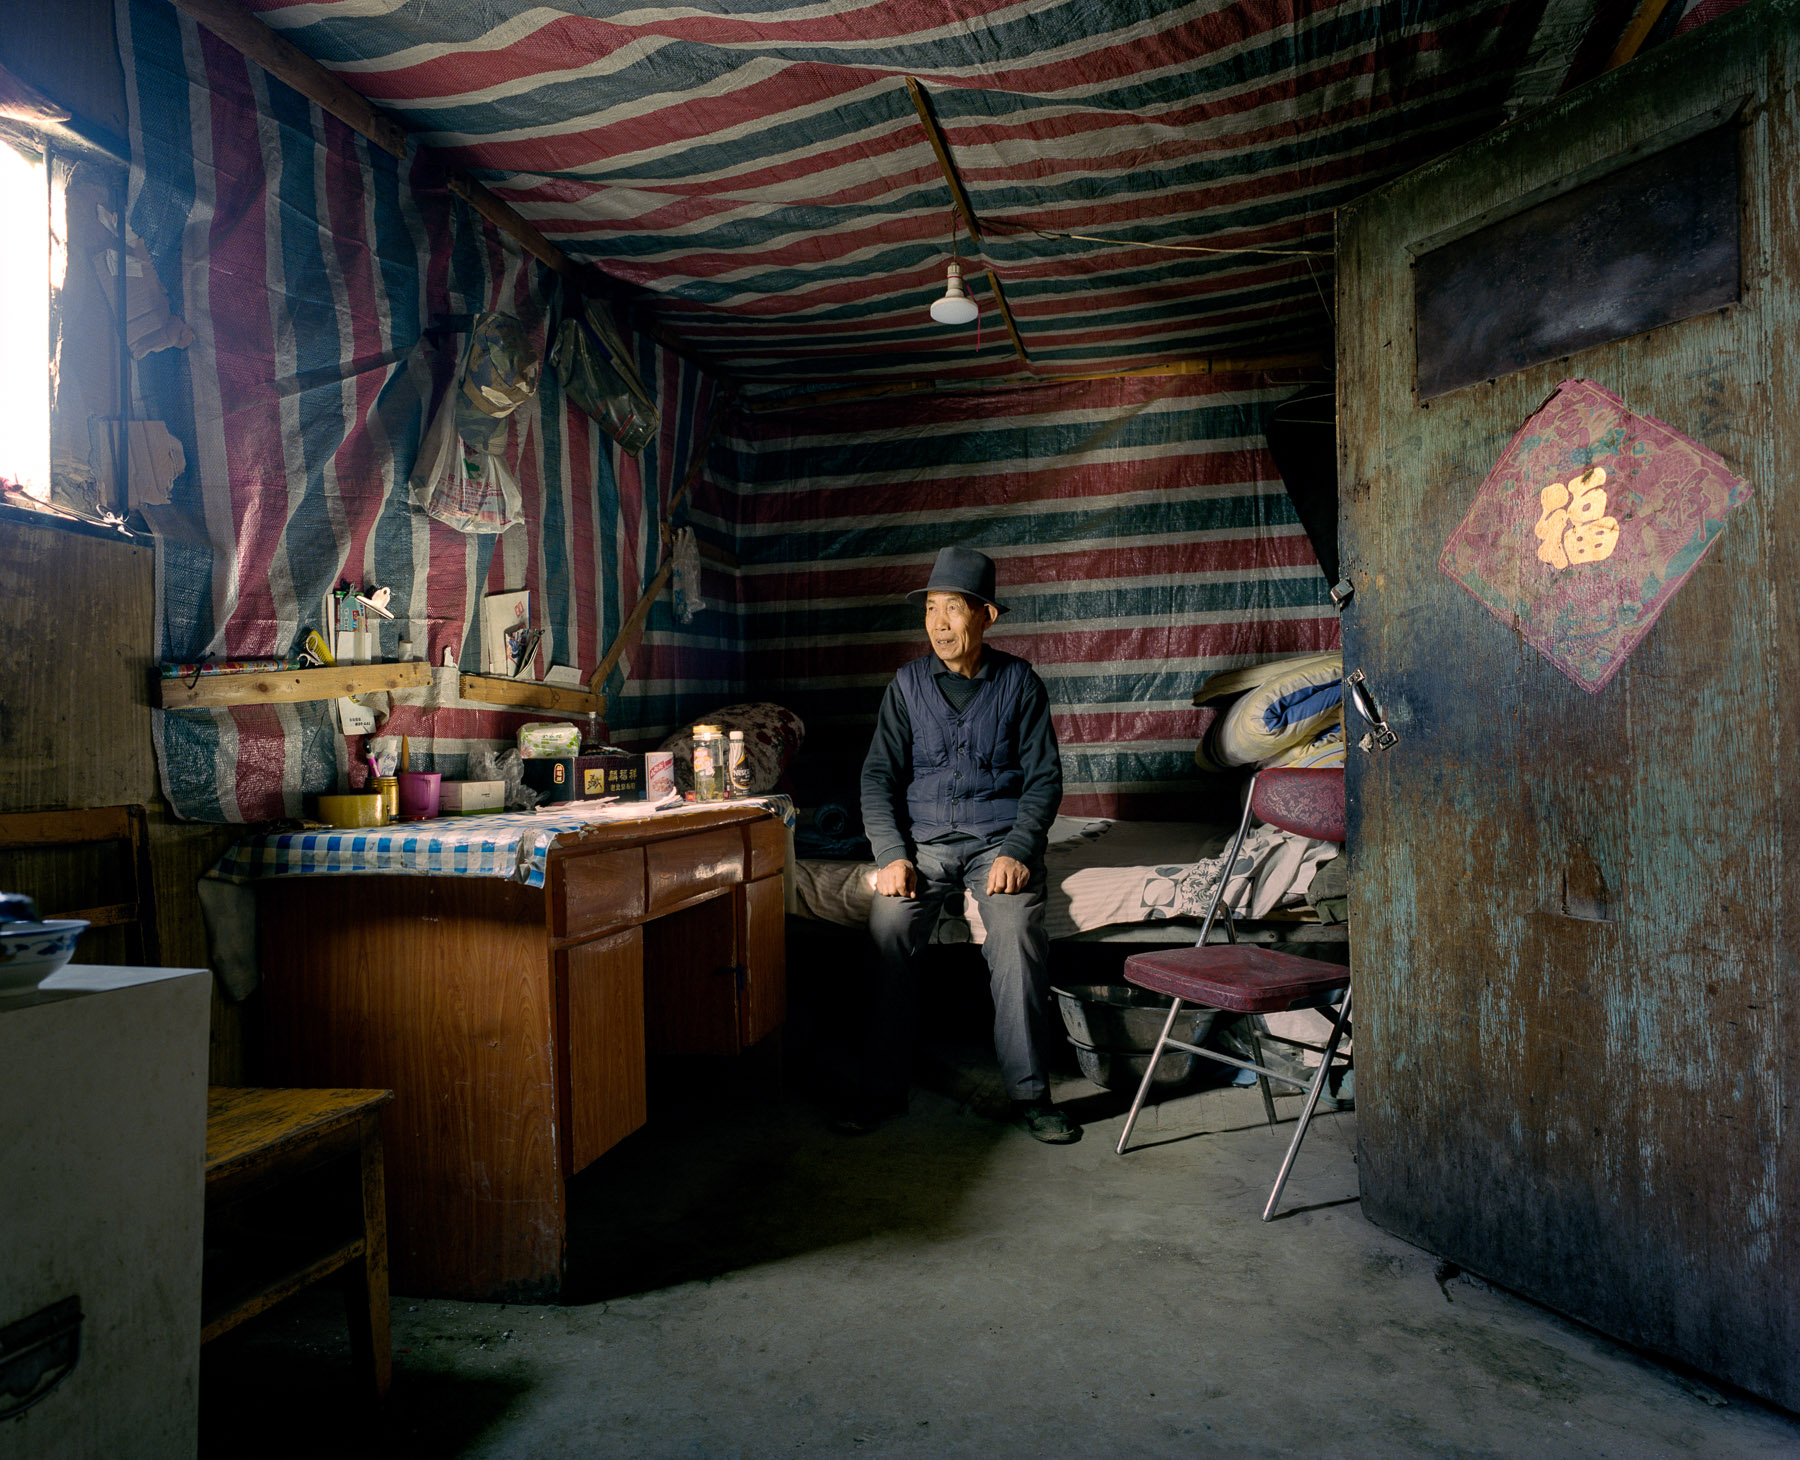  May 2016. Xinjiang province, China. Old Han Chinese man photographed in the bedroom of his house. He is the guardian of a mine in the Taklmakan desert in the western Chinese province of Xinjiang.  